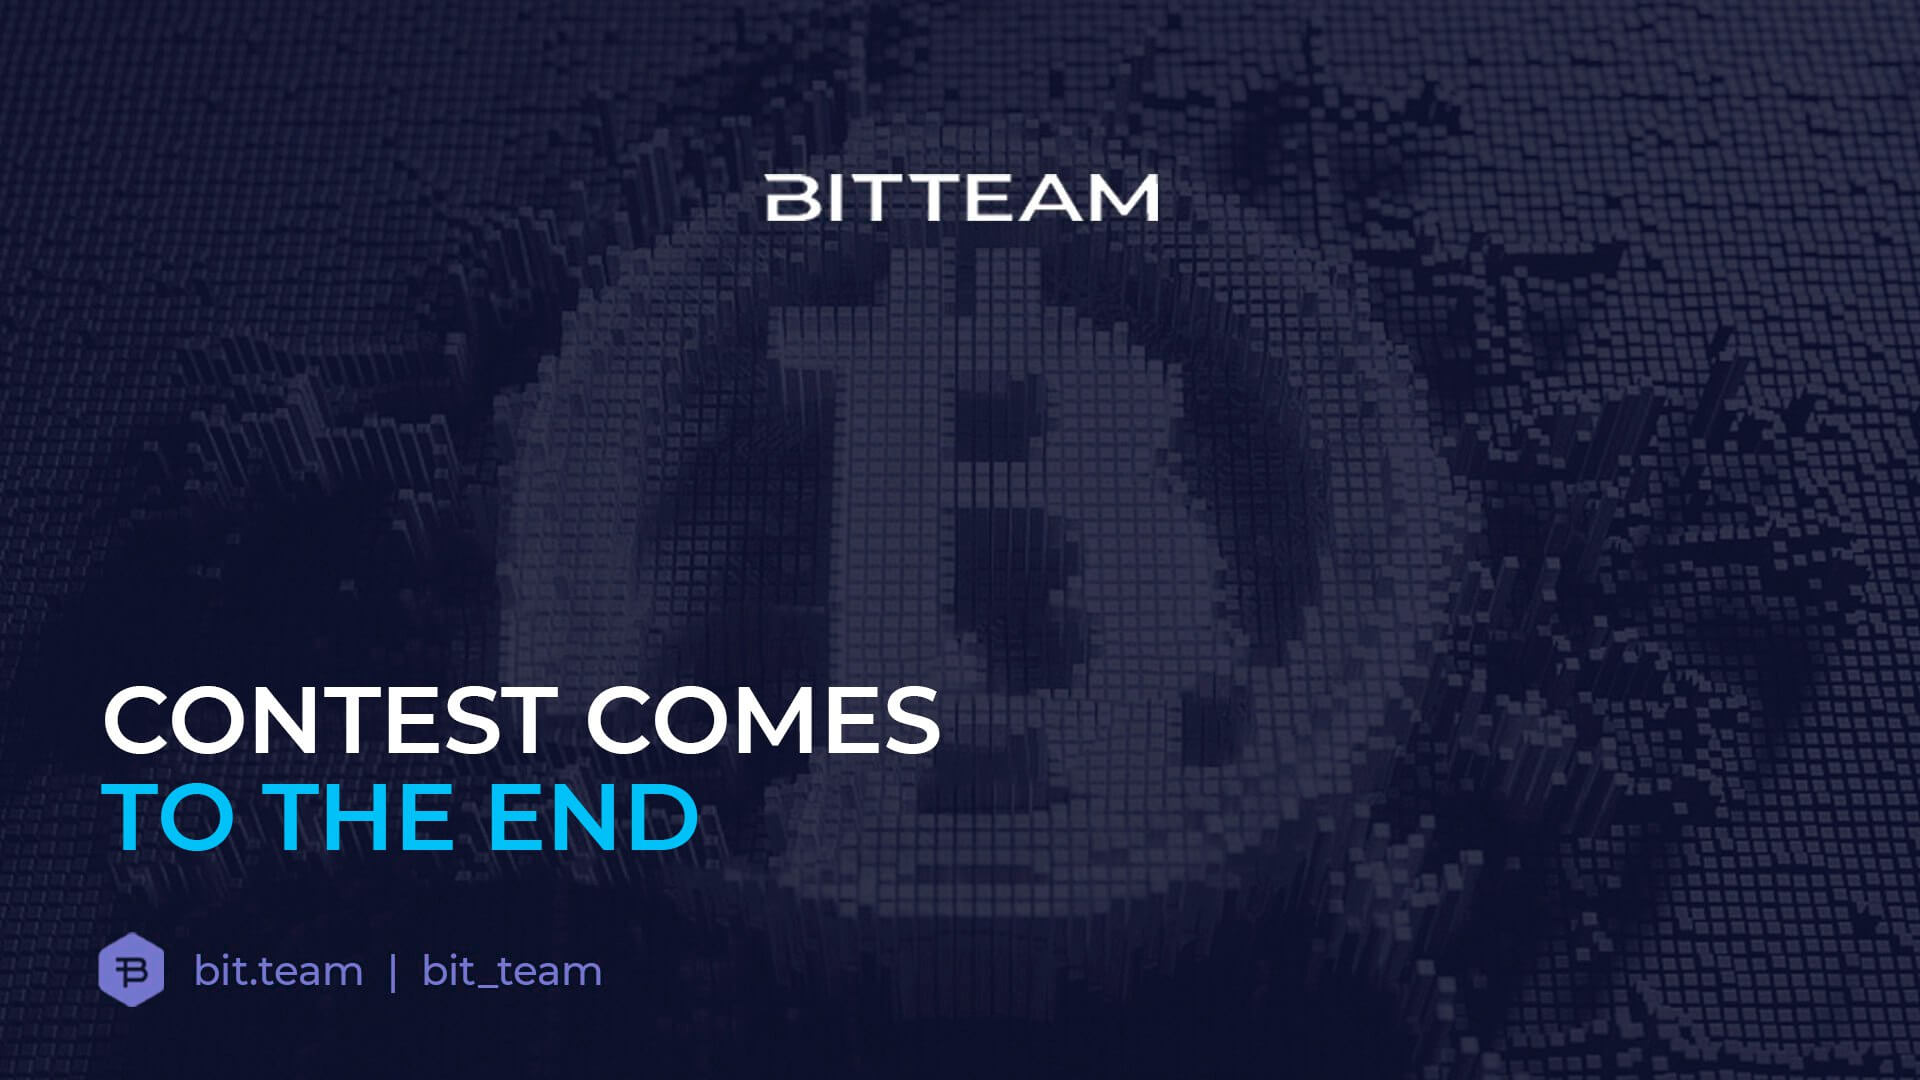 Only a few days left until the end of the trading contest on p2p.bit.team!